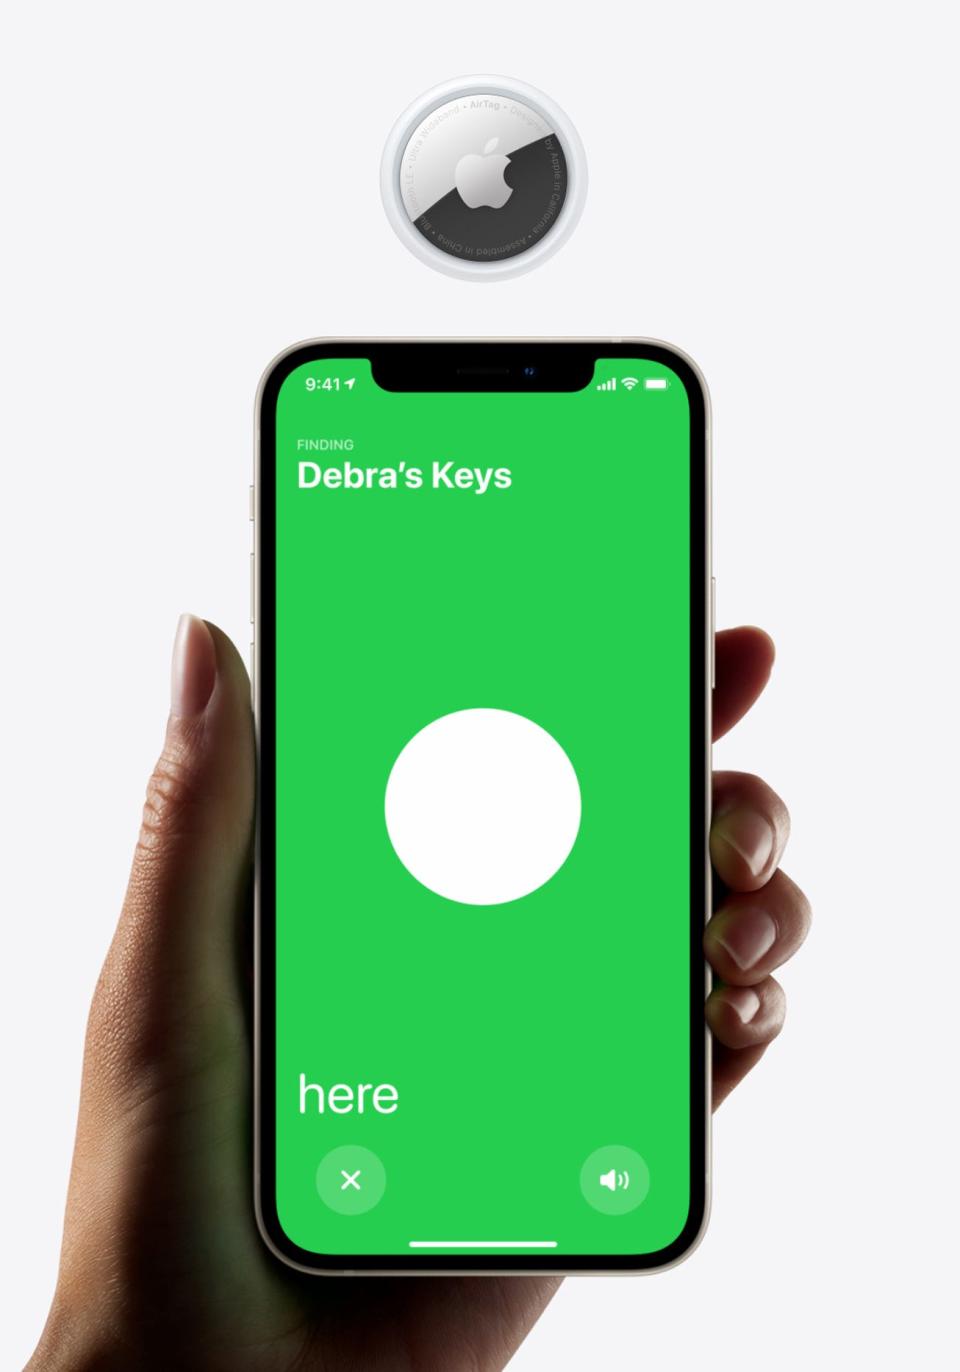 Apple launched its own tile trackers a couple of weeks ago, offering ultra-wideband support (for added accuracy), voice search through Siri, and integration with the FindMy app.